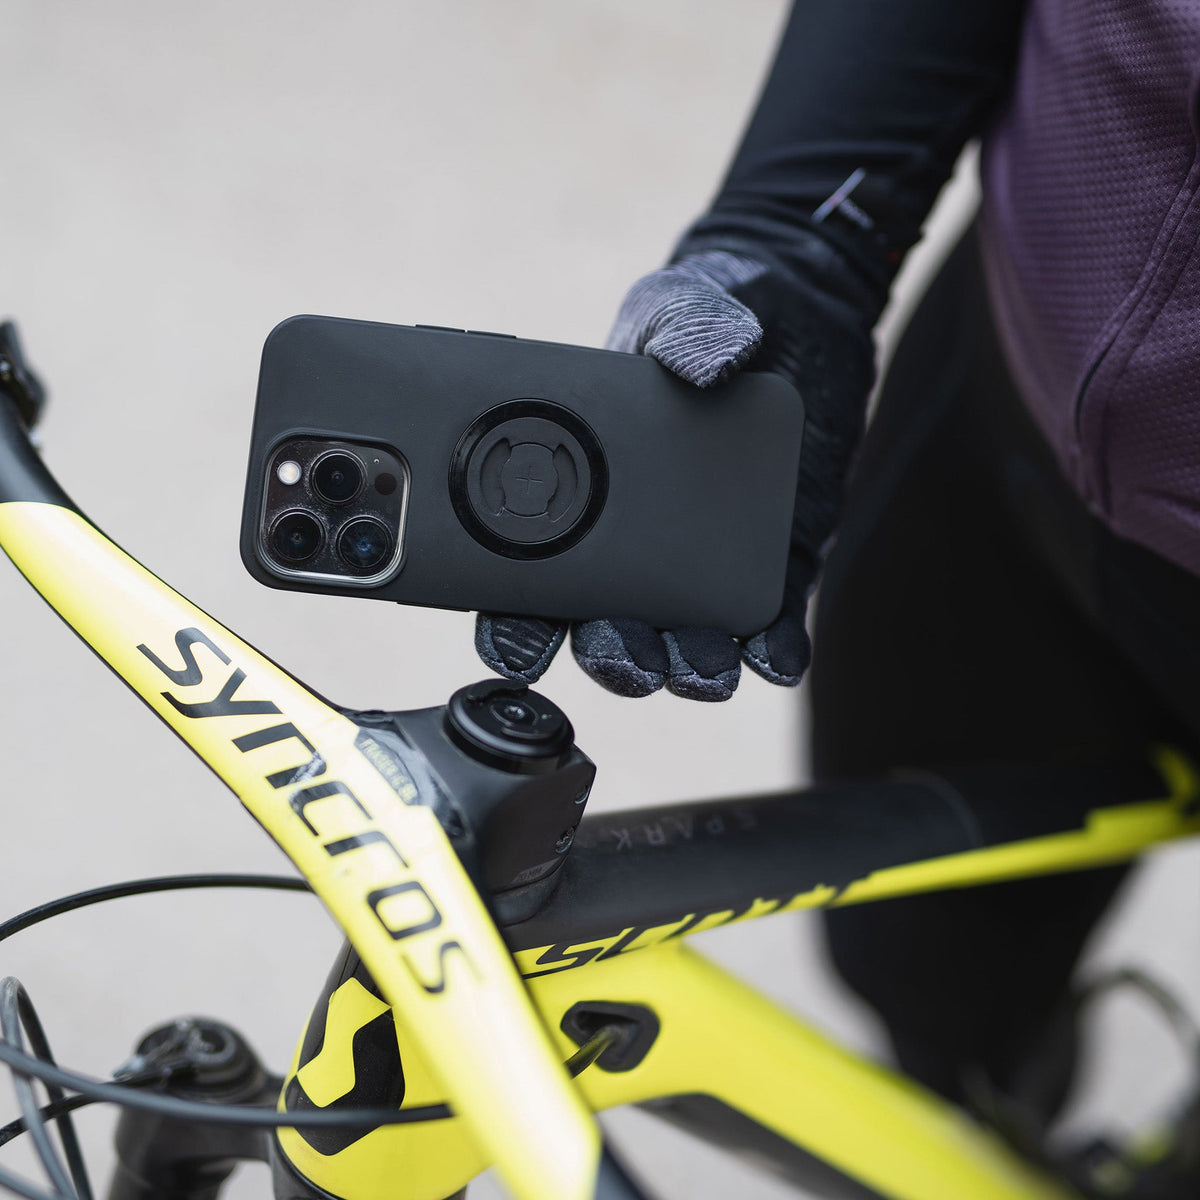 SP Connect Micro Stem Mount